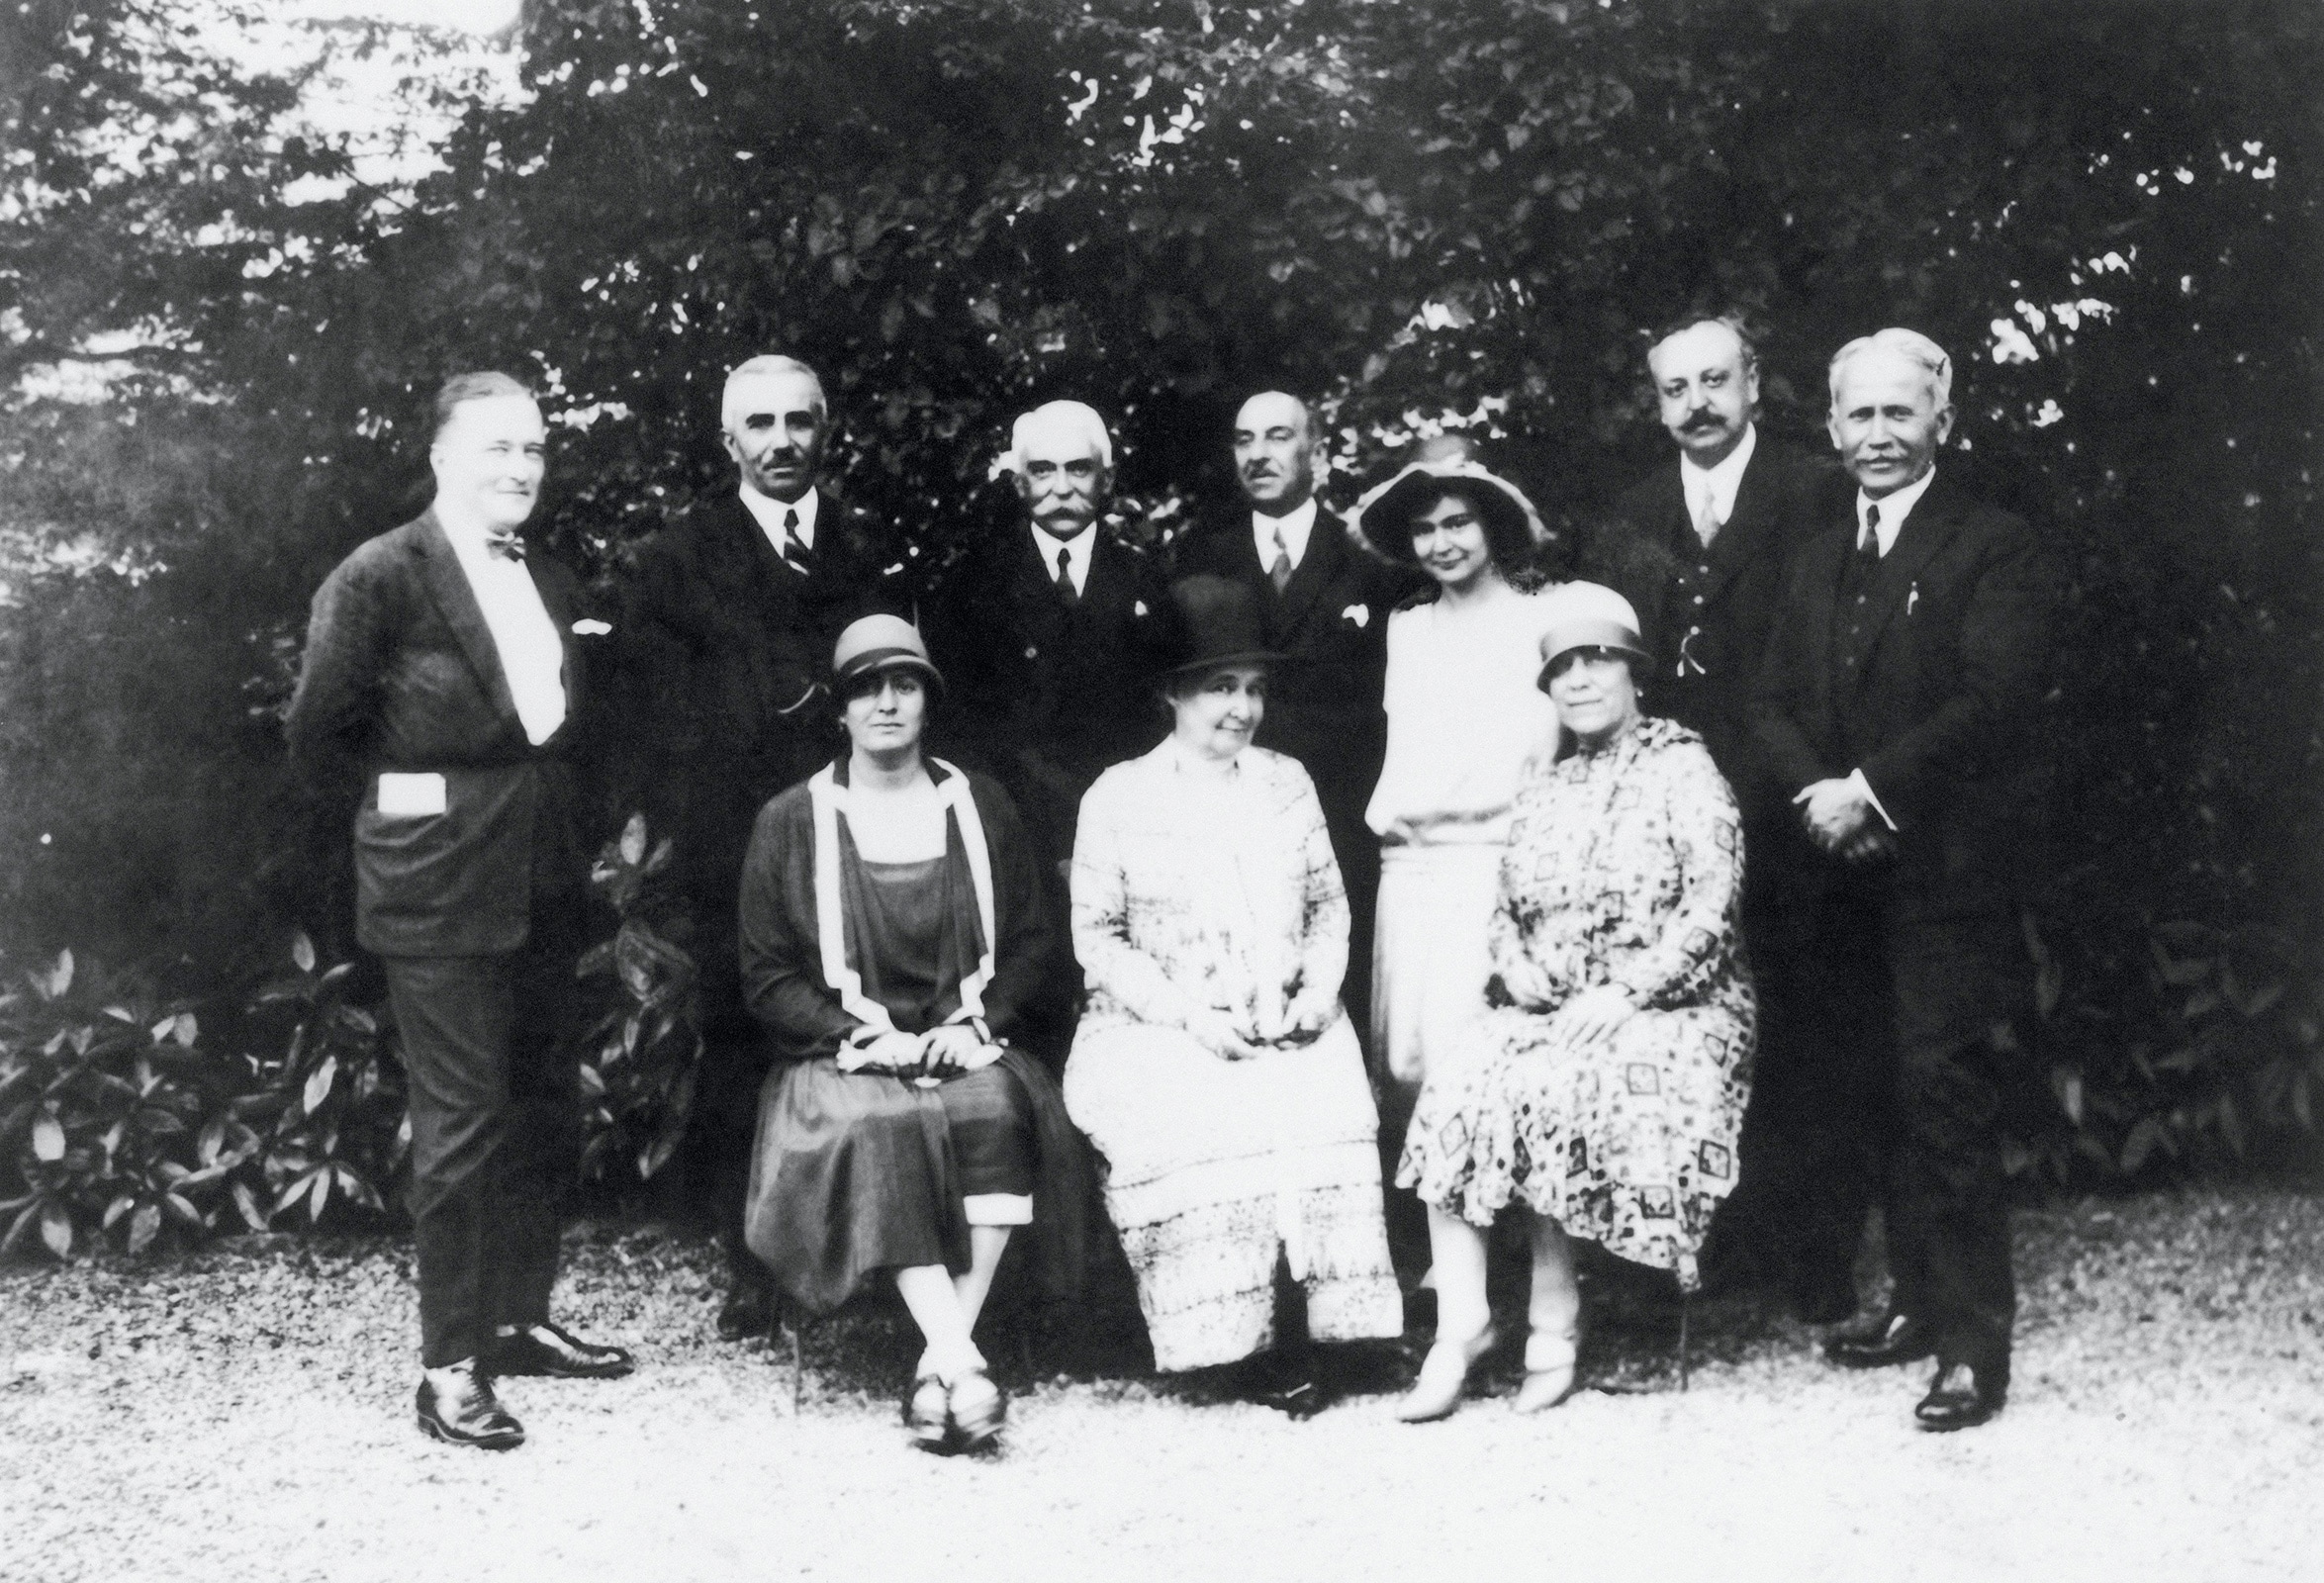  24th IOC Session and 8th Congress, Prague, 1925 - Group photograph with Baron Pierre de COUBERTIN, IOC President (center) and his wife Marie ROTHAN, Baronness de COUBERTIN in front of him.